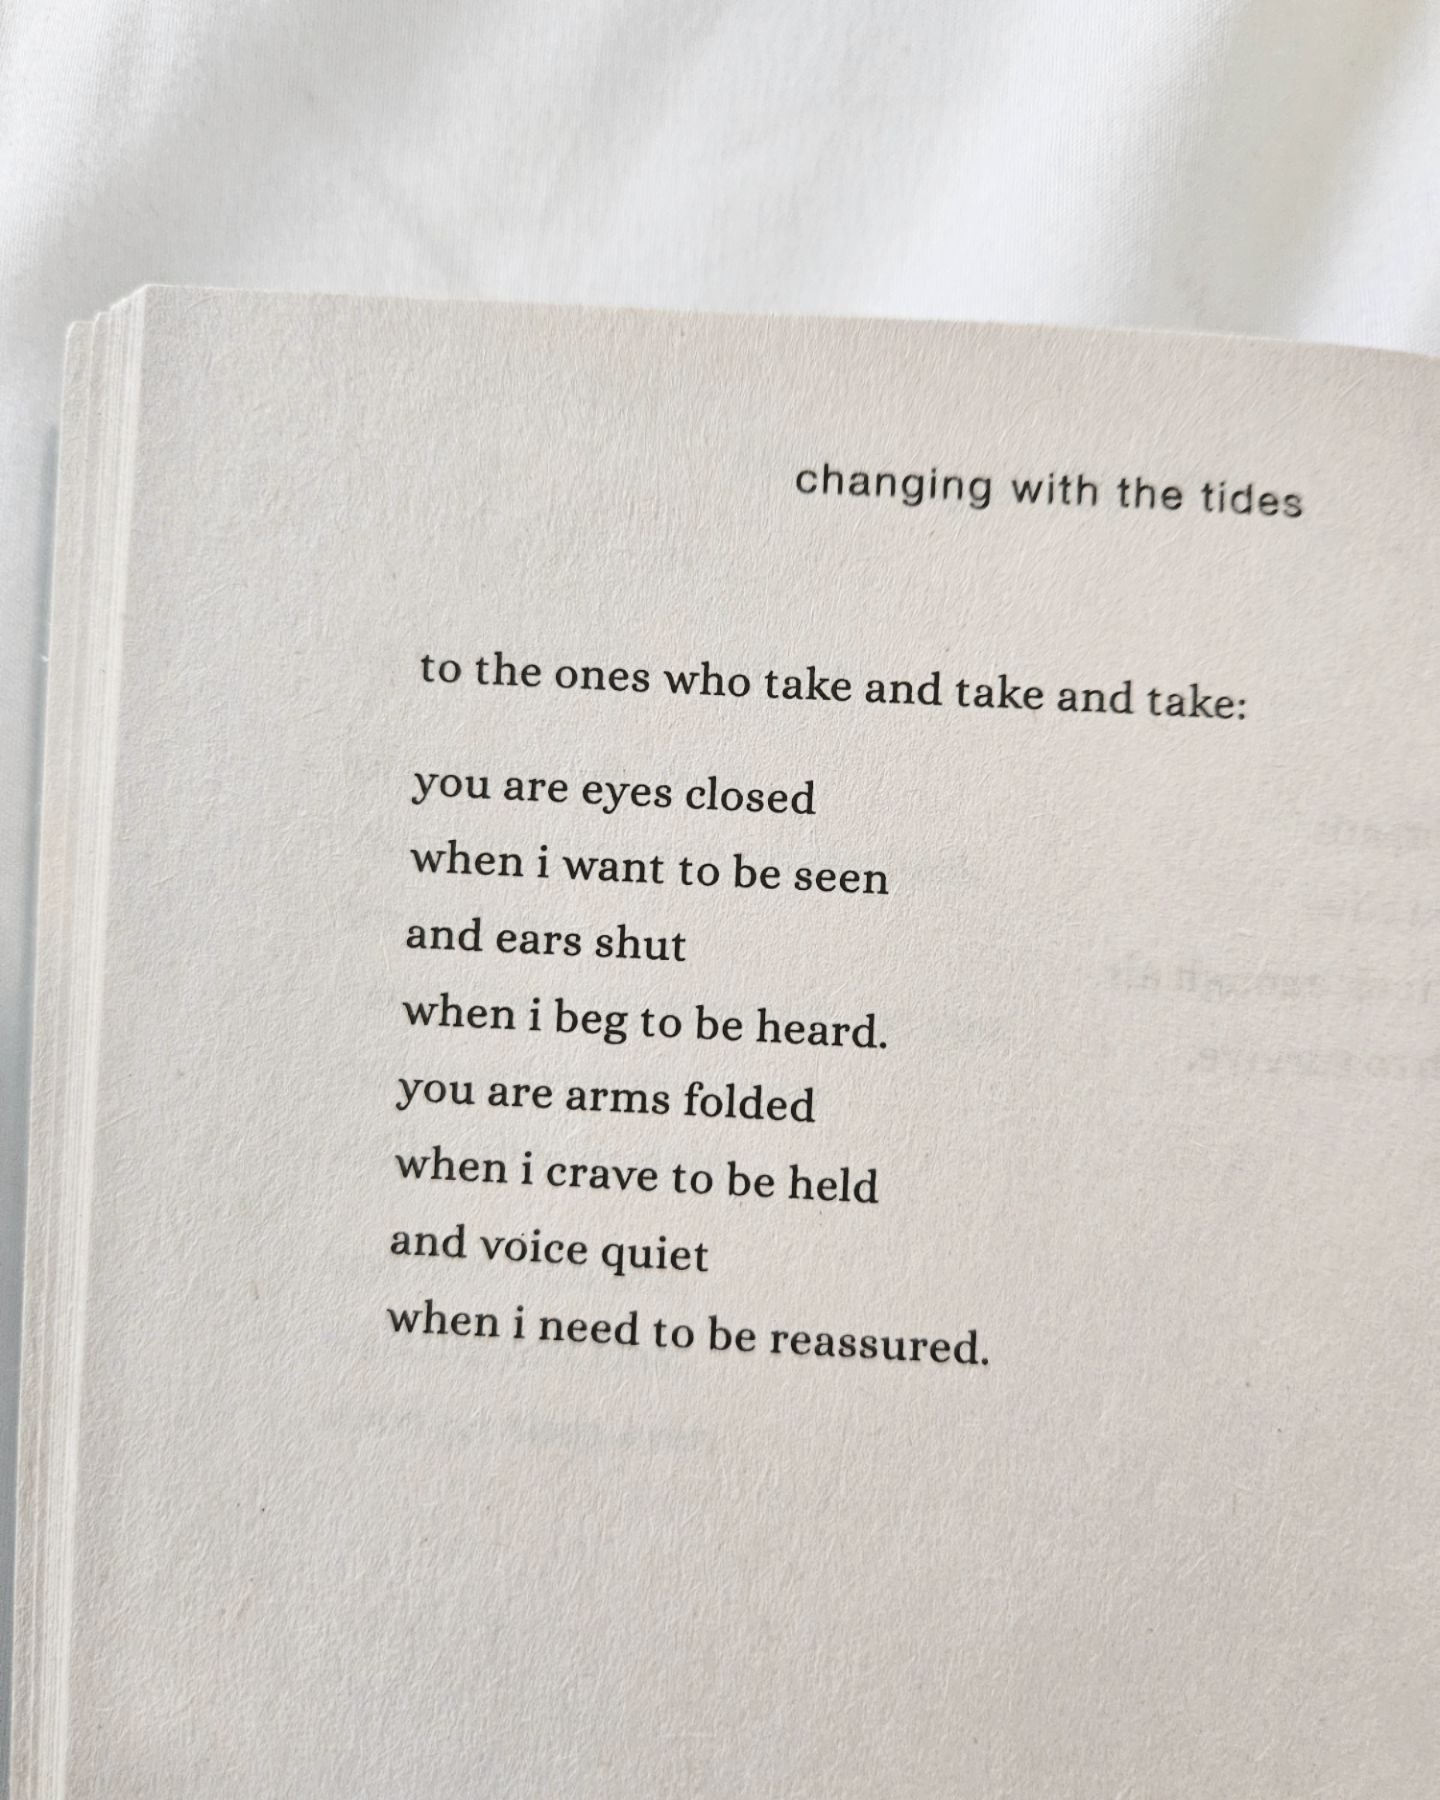 have you ever been in a relationship like this? 💛 from my most popular poetry book: changing with the tides by shelby leigh on amazon 

#poetrybook #relationshipquotes